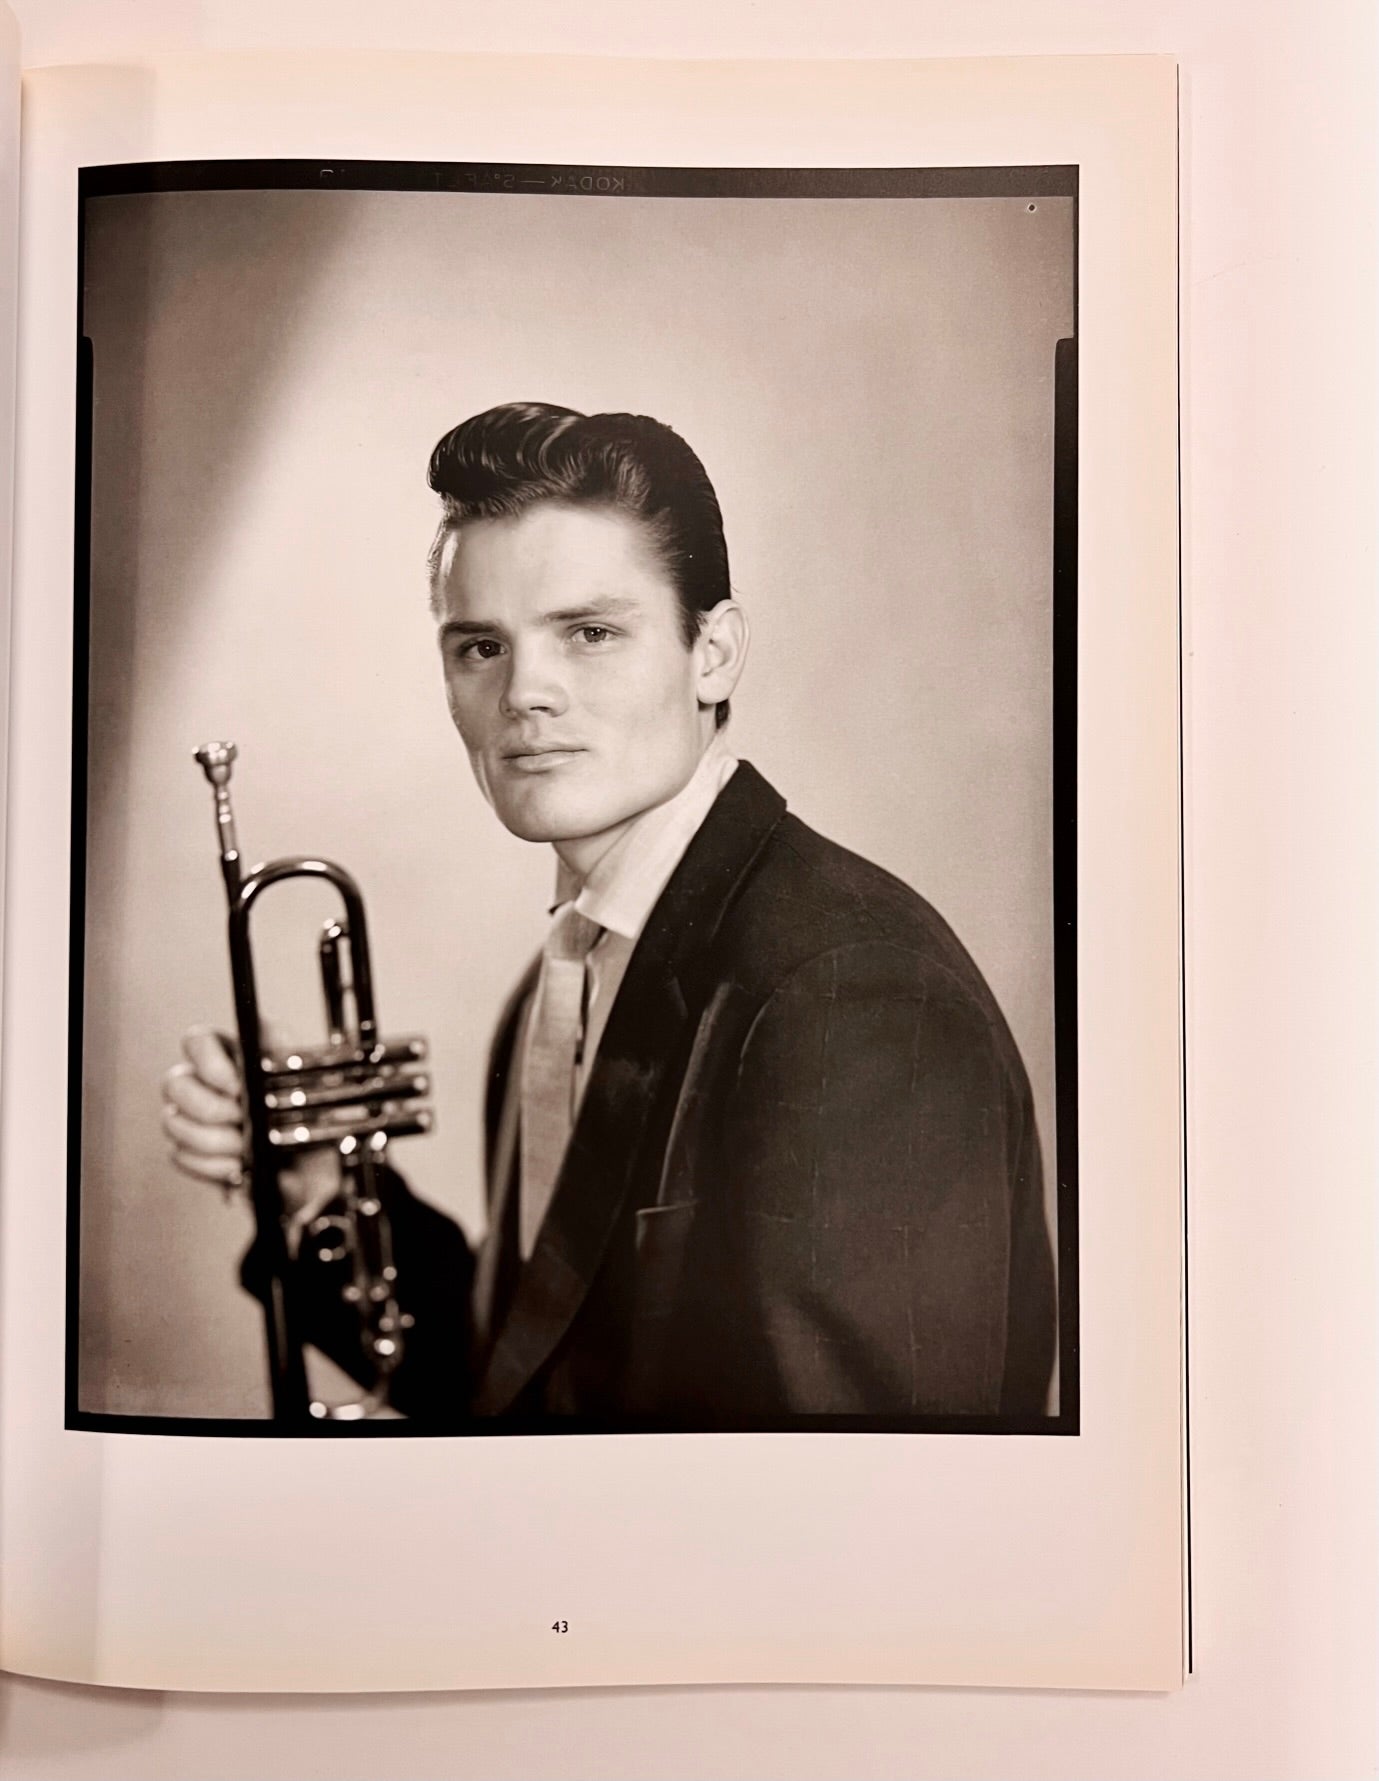 CLAXTON, William. Young Chet: The Young Chet Baker Photographed by William Claxton.